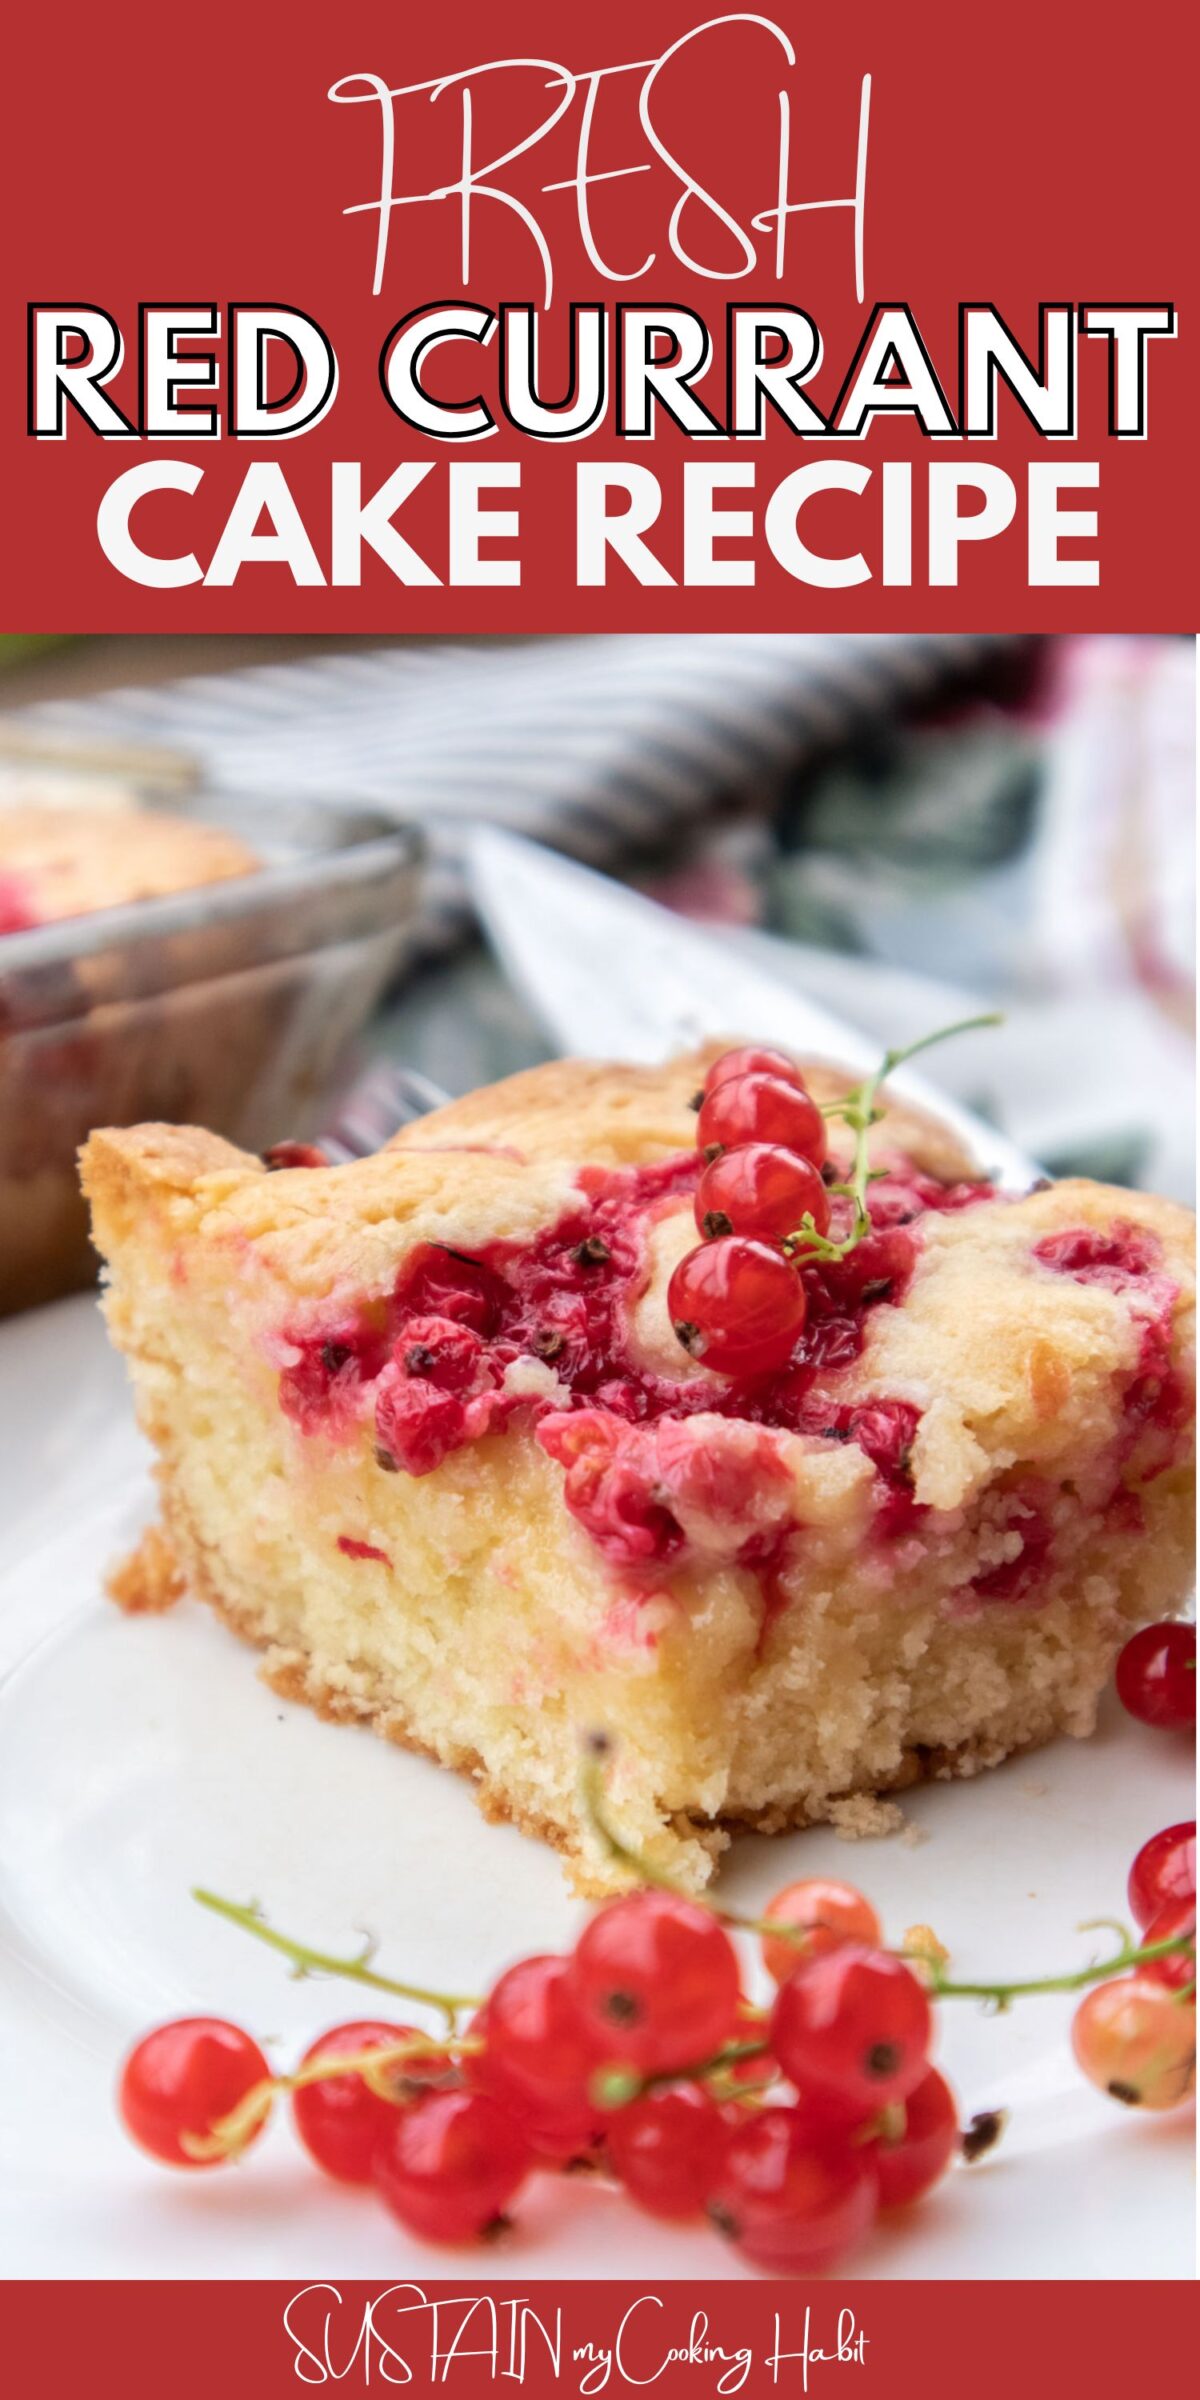 Close up of slice of red currant cake with fresh currants and text overlay.